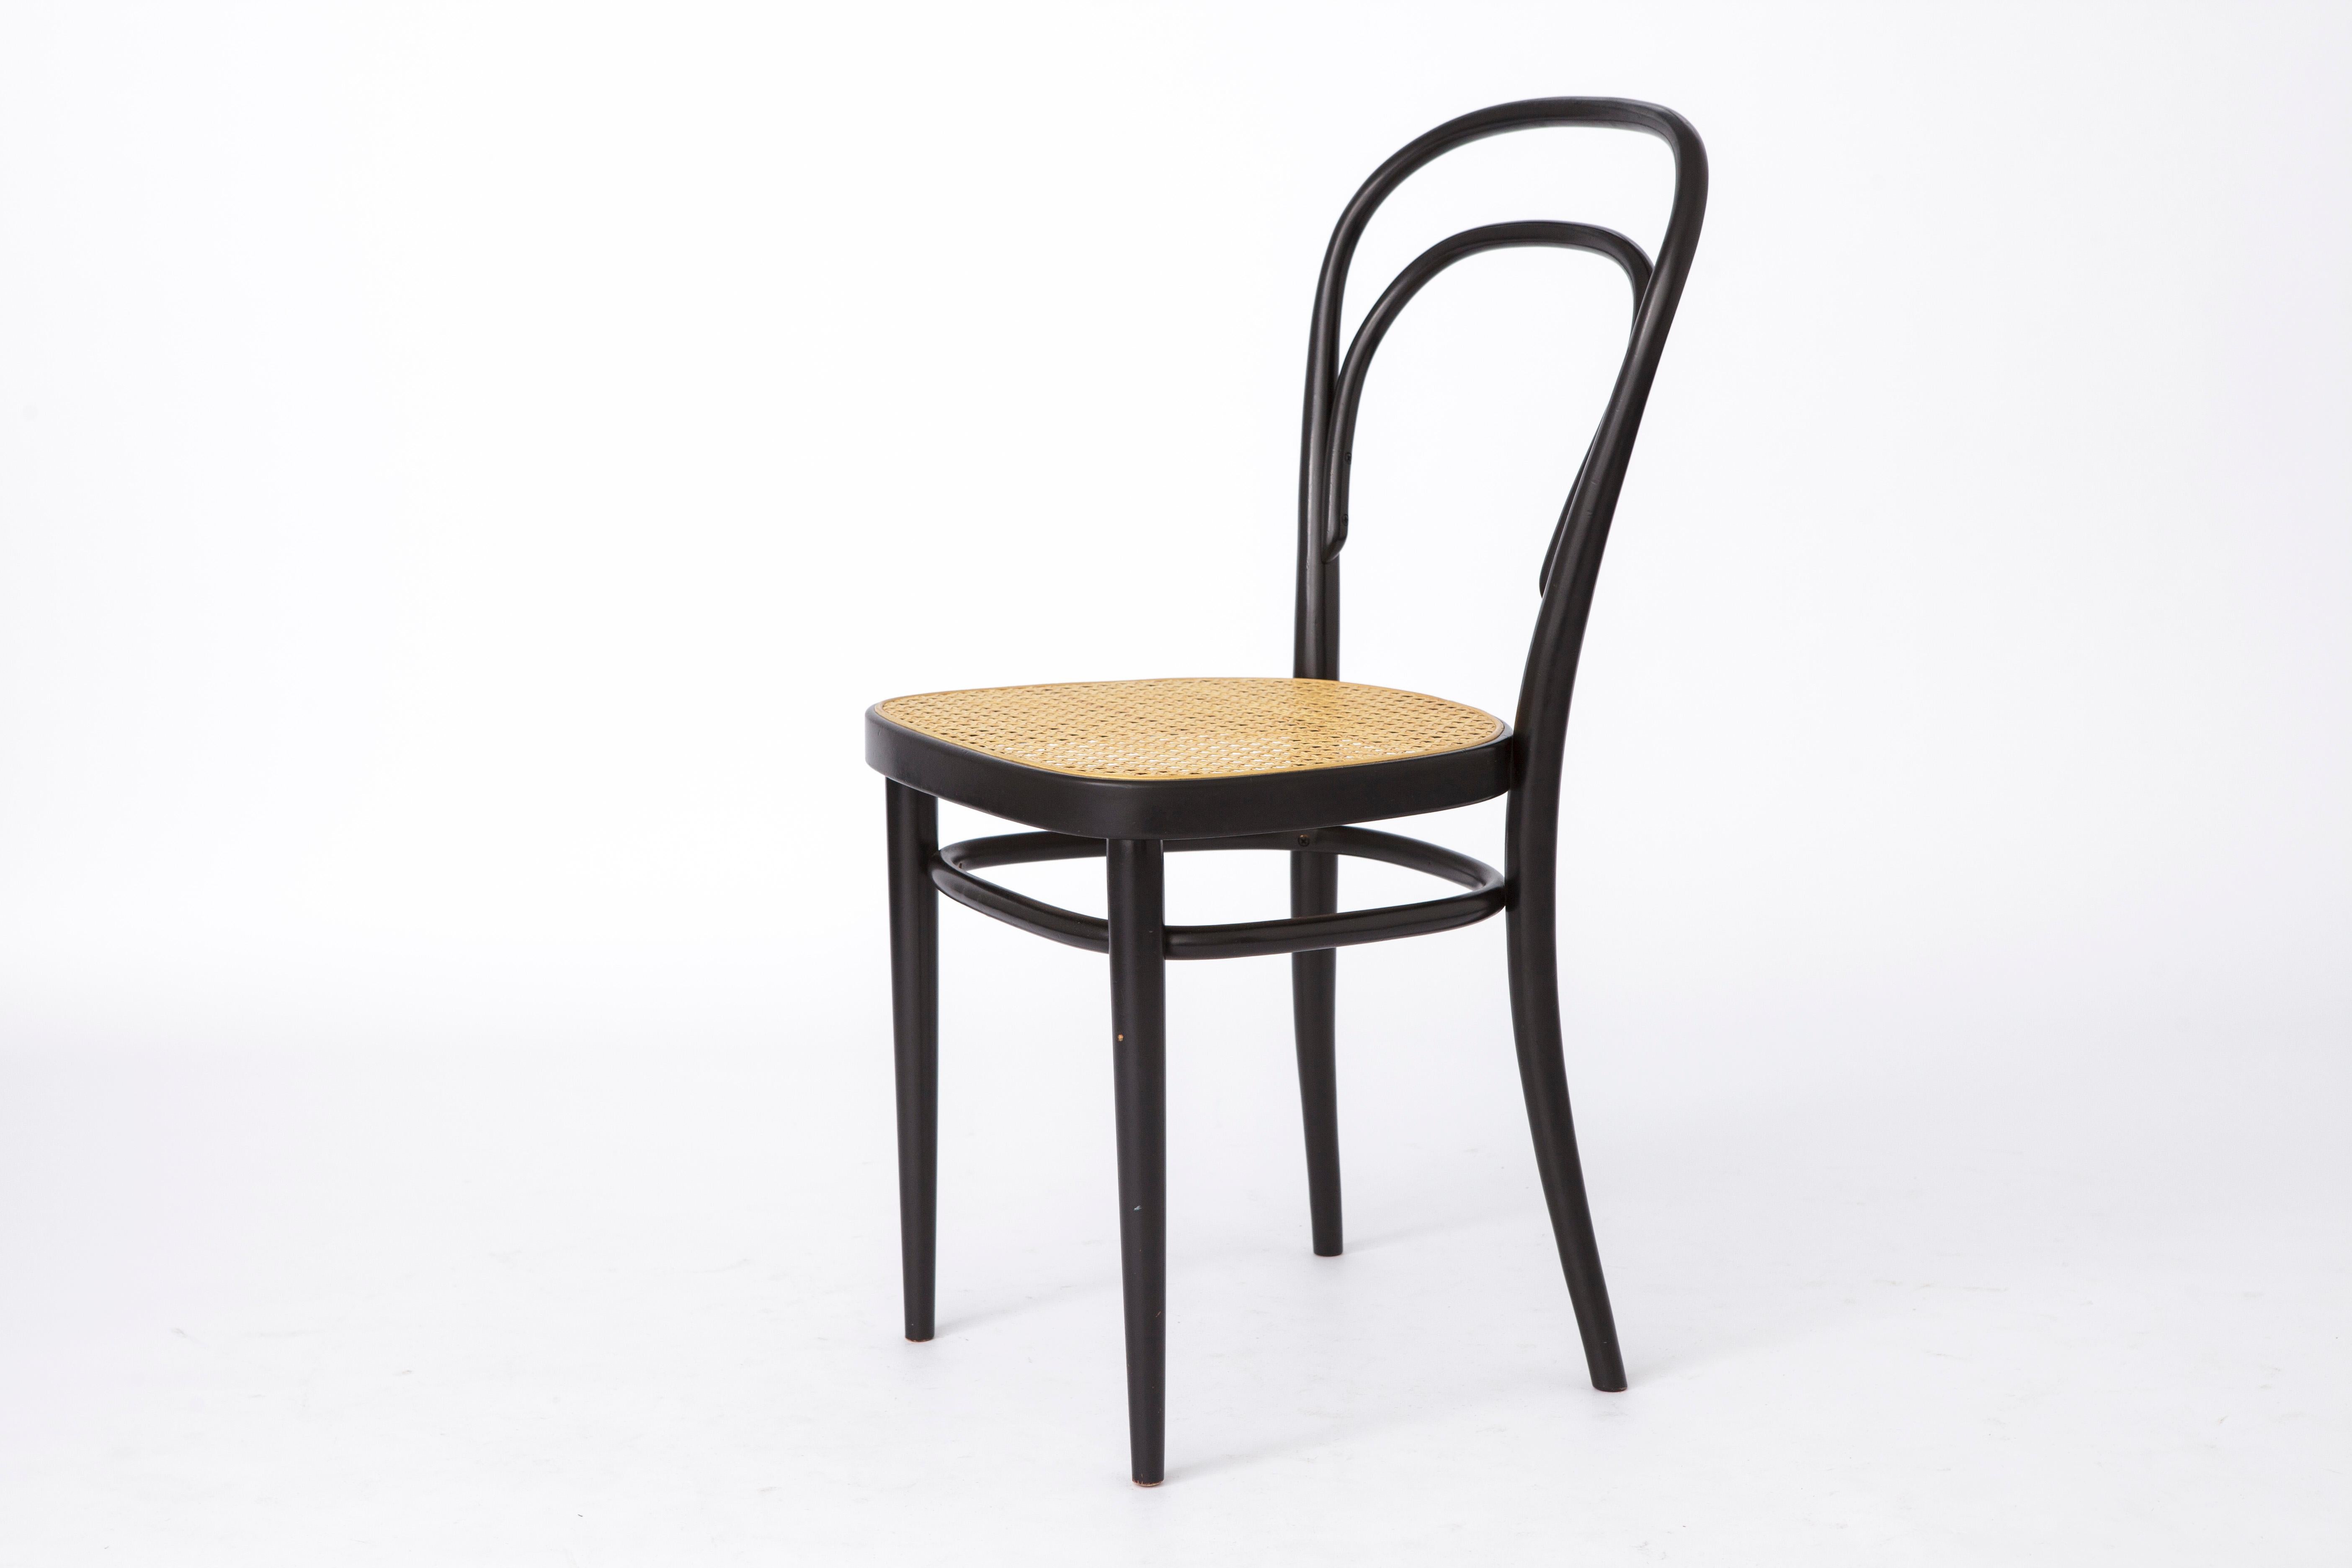 Polished 1 of 2 Thonet Dining Chair #214, Bentwood, Vintage, Austria For Sale